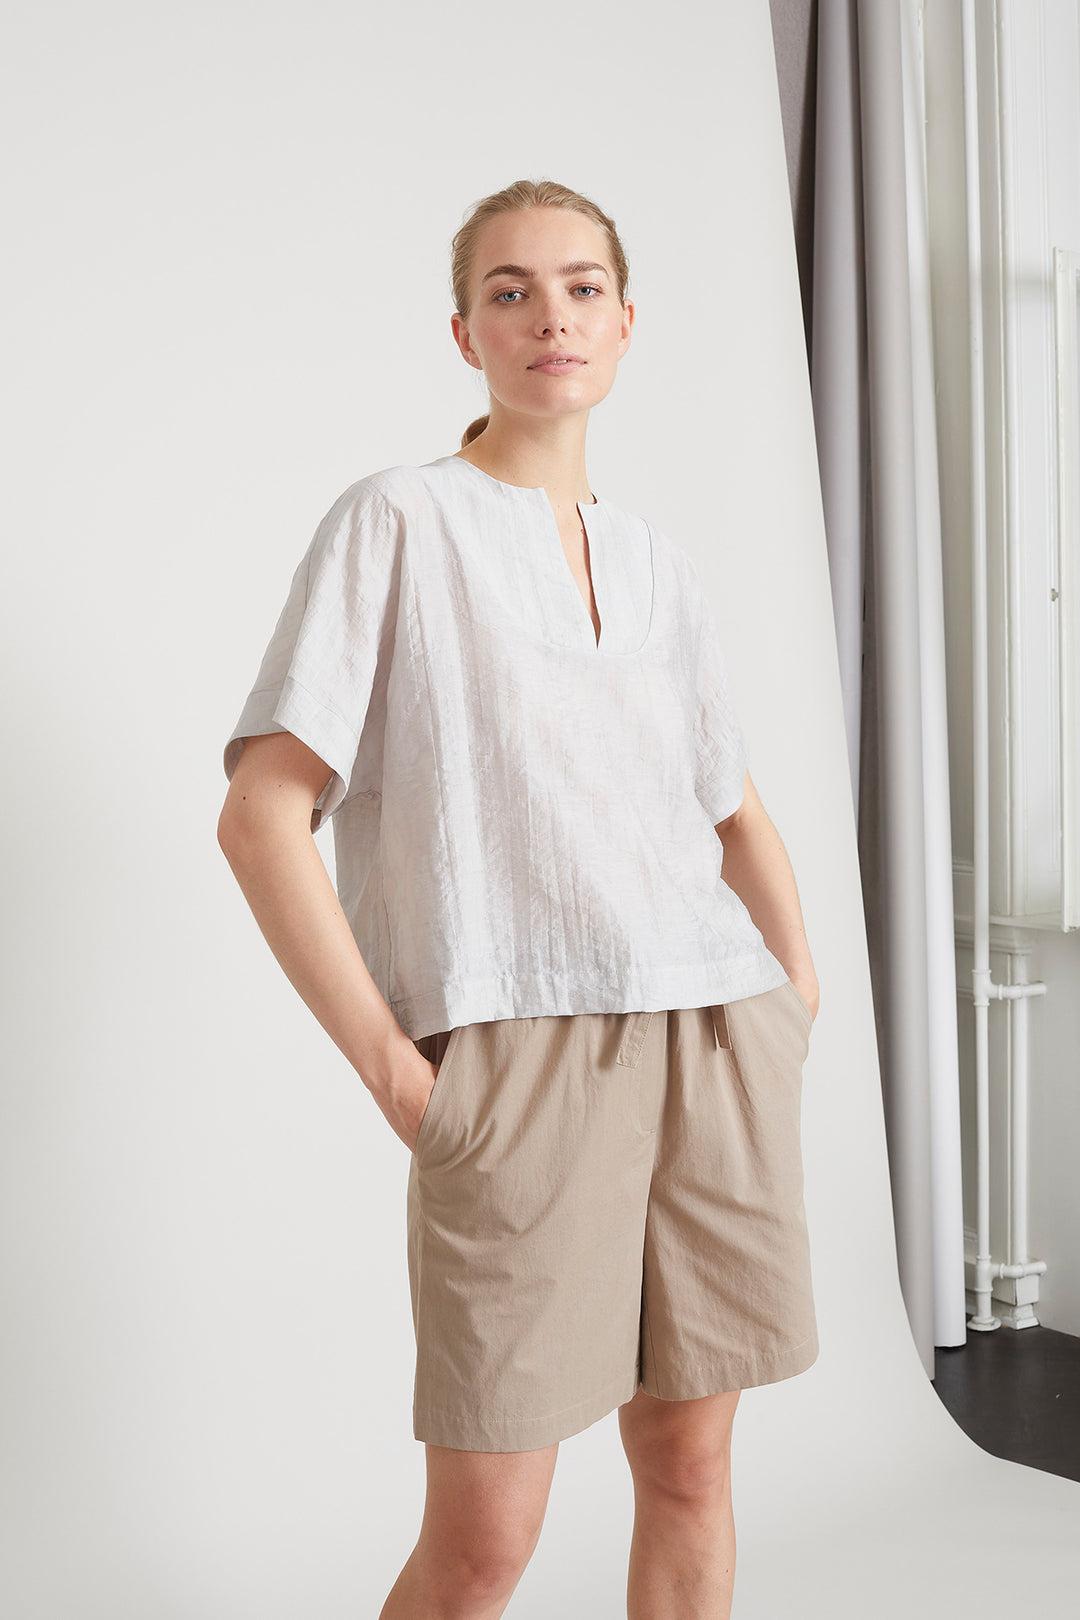 Heartmade Tanit top TOPS 133 White sand